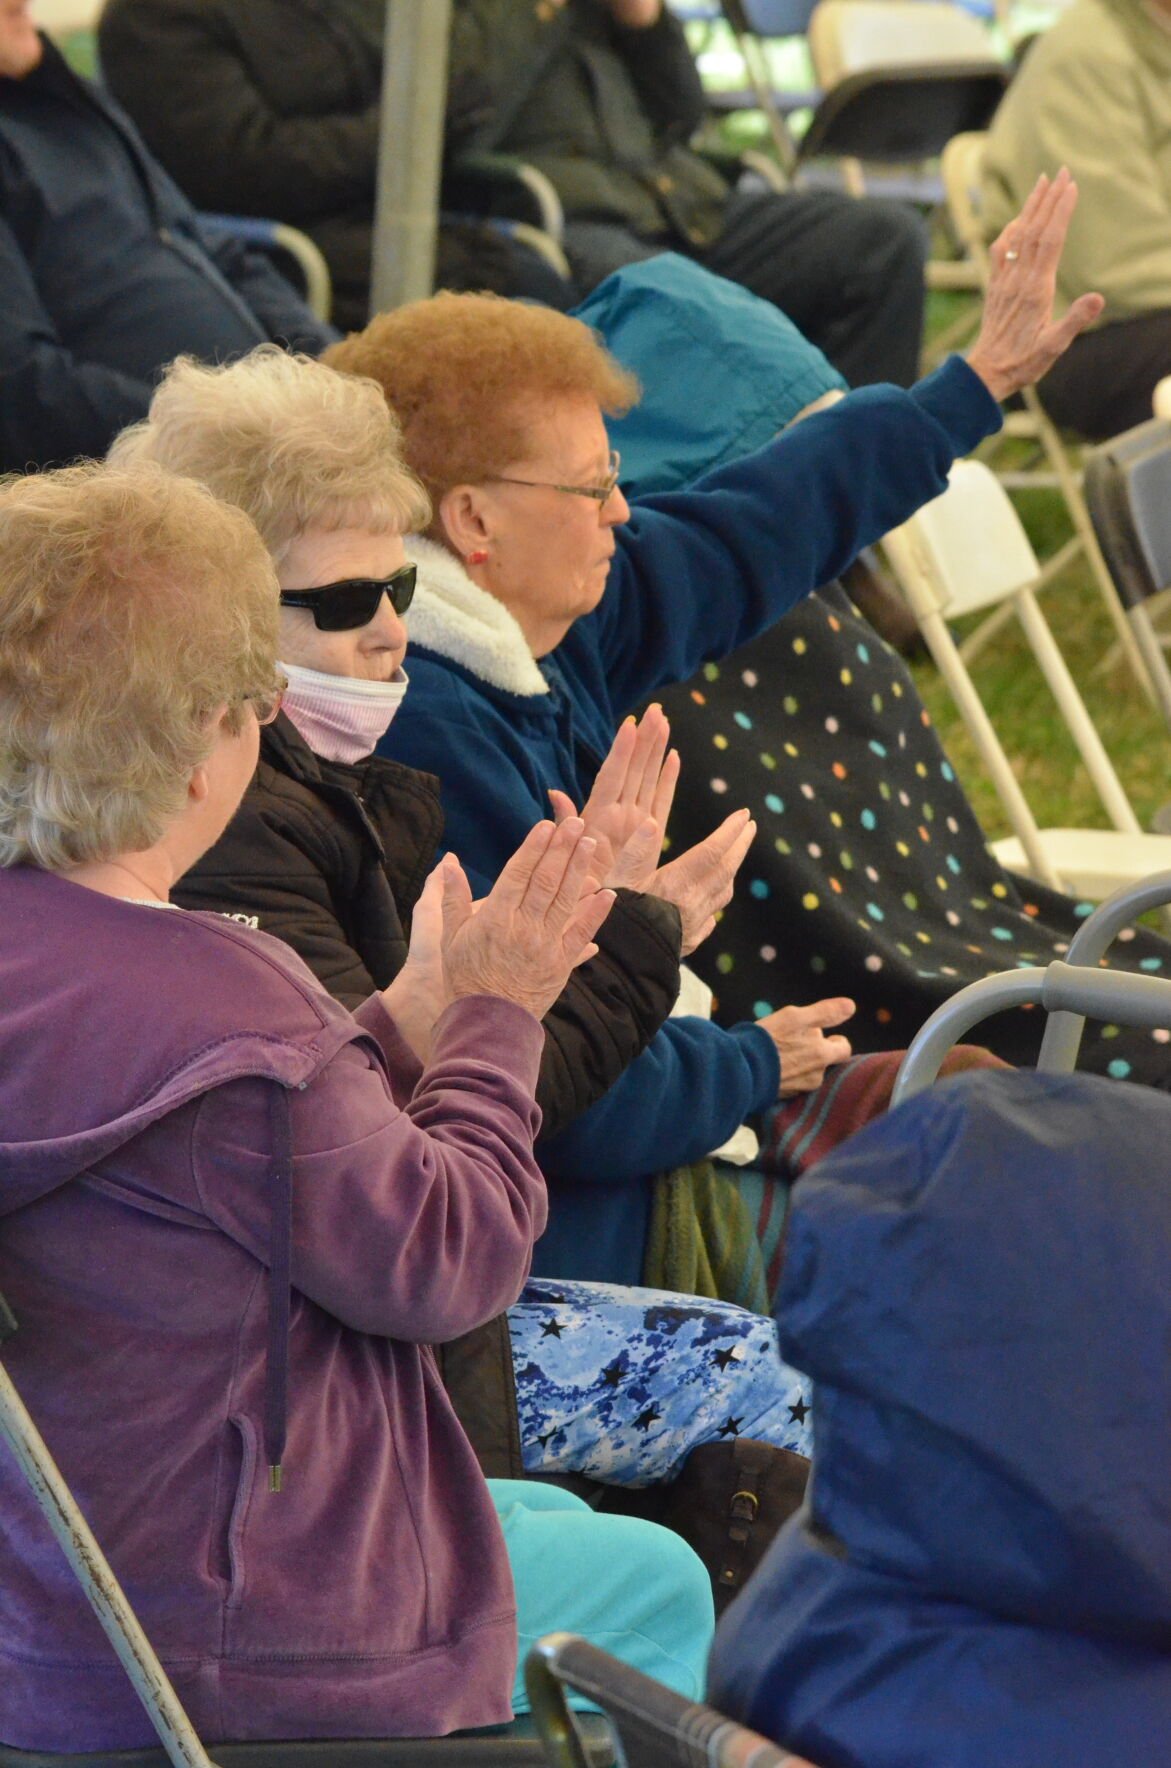 Audience members clap along as On Bended Knee performs at Harmony Hill Music Festival in Harmony on Saturday.